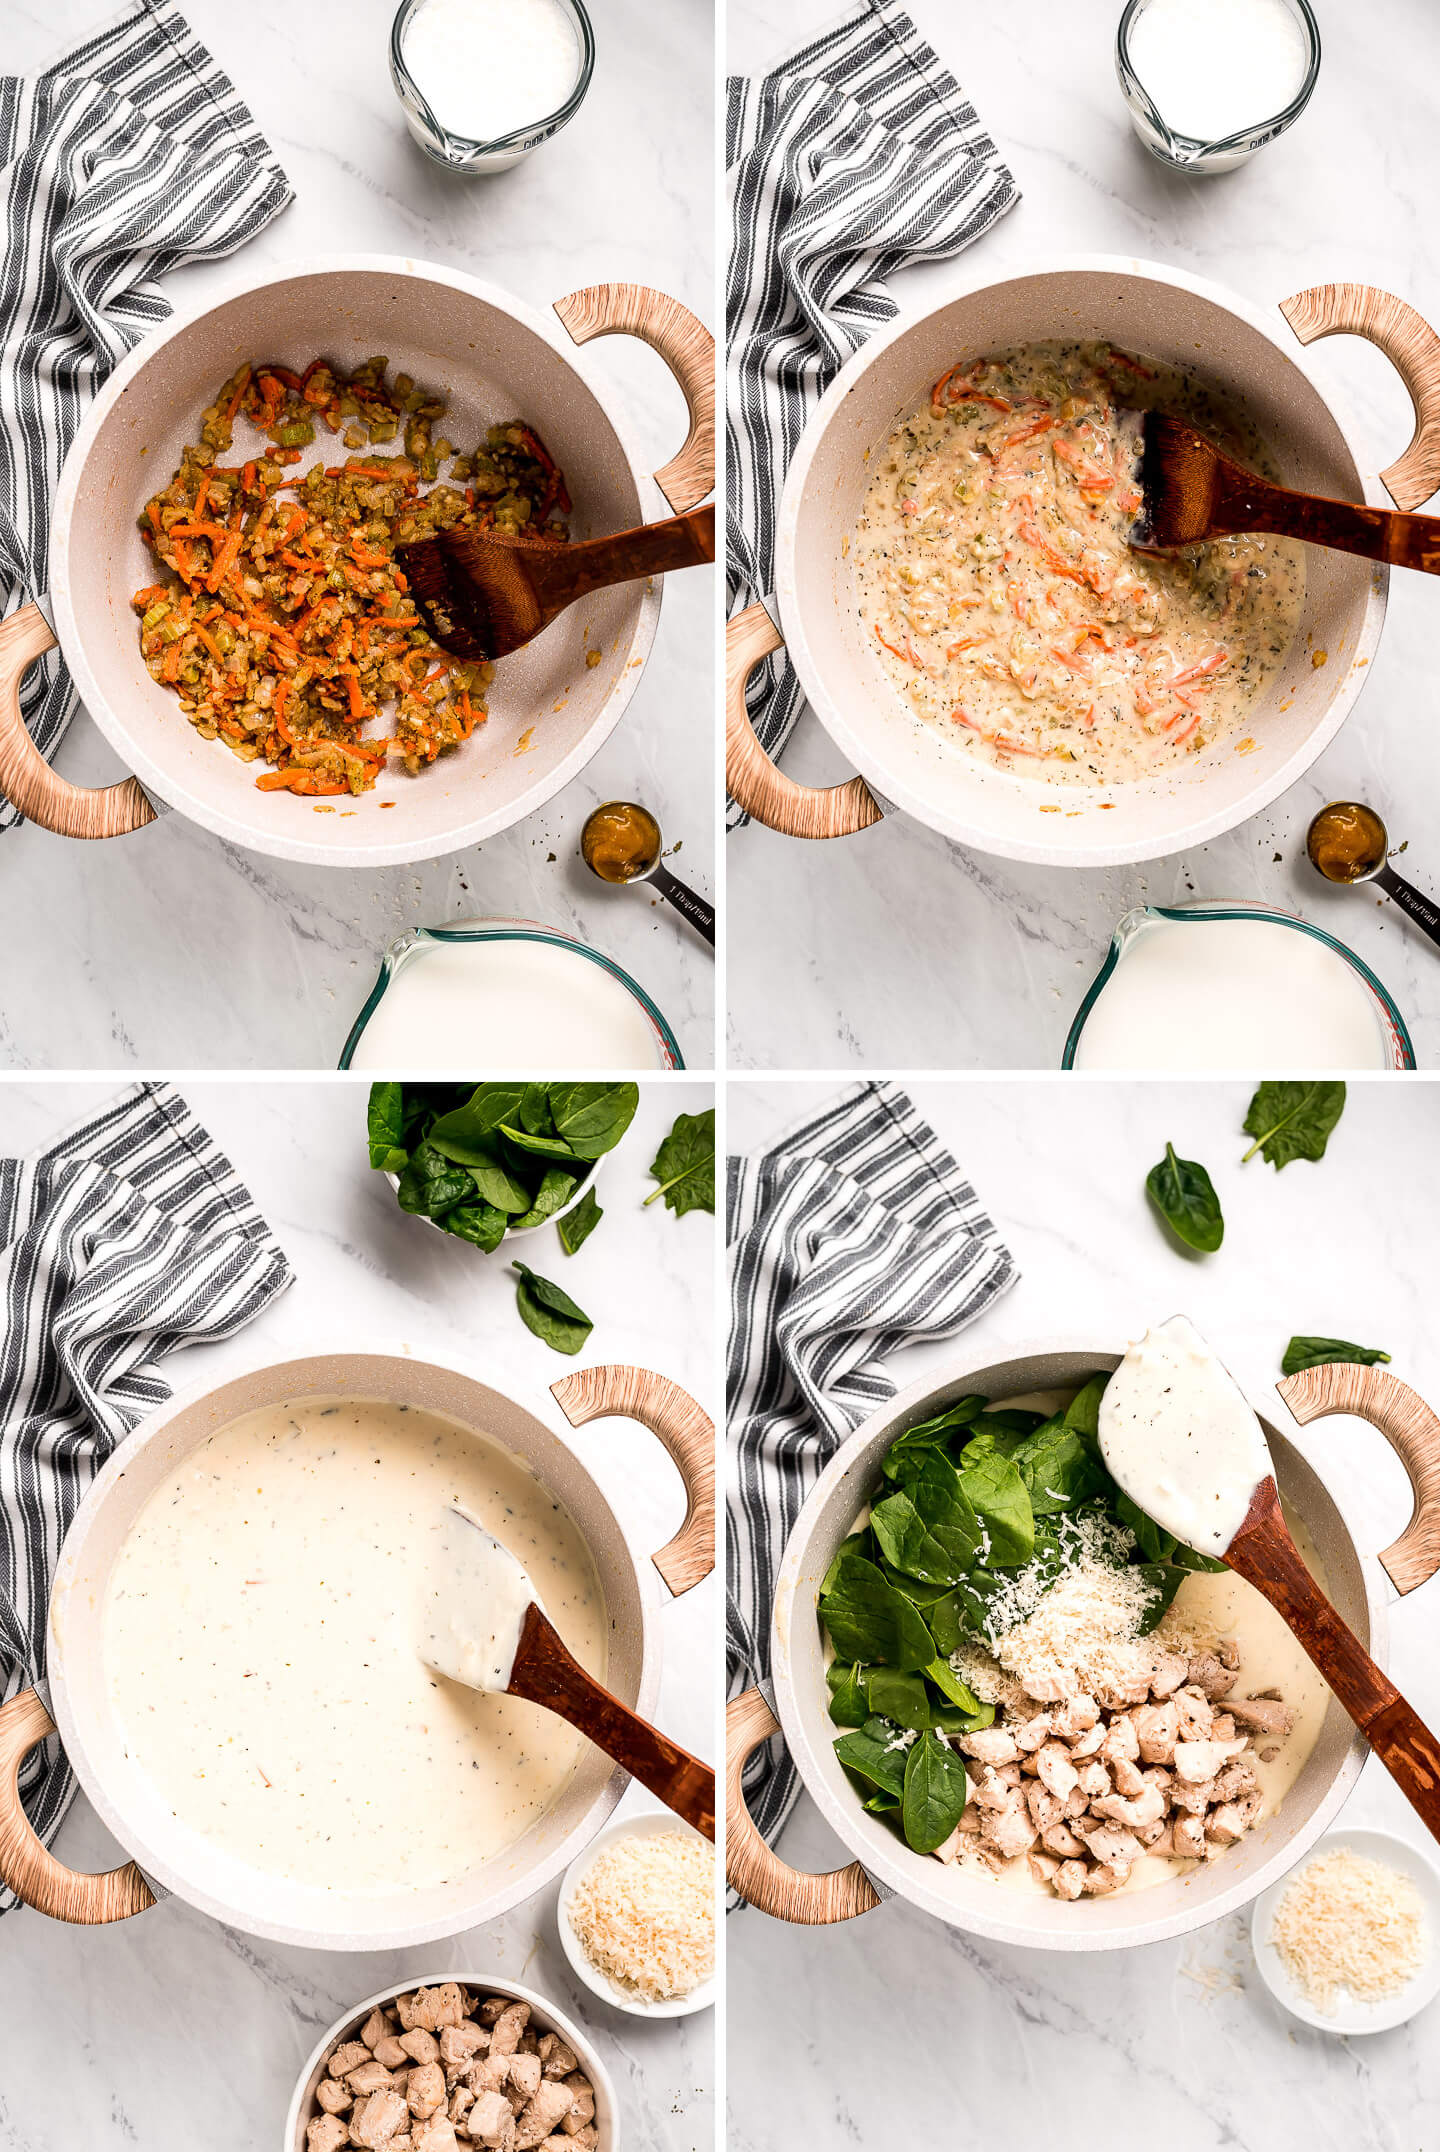 Photos showing how to make Chicken Gnocchi Soup.